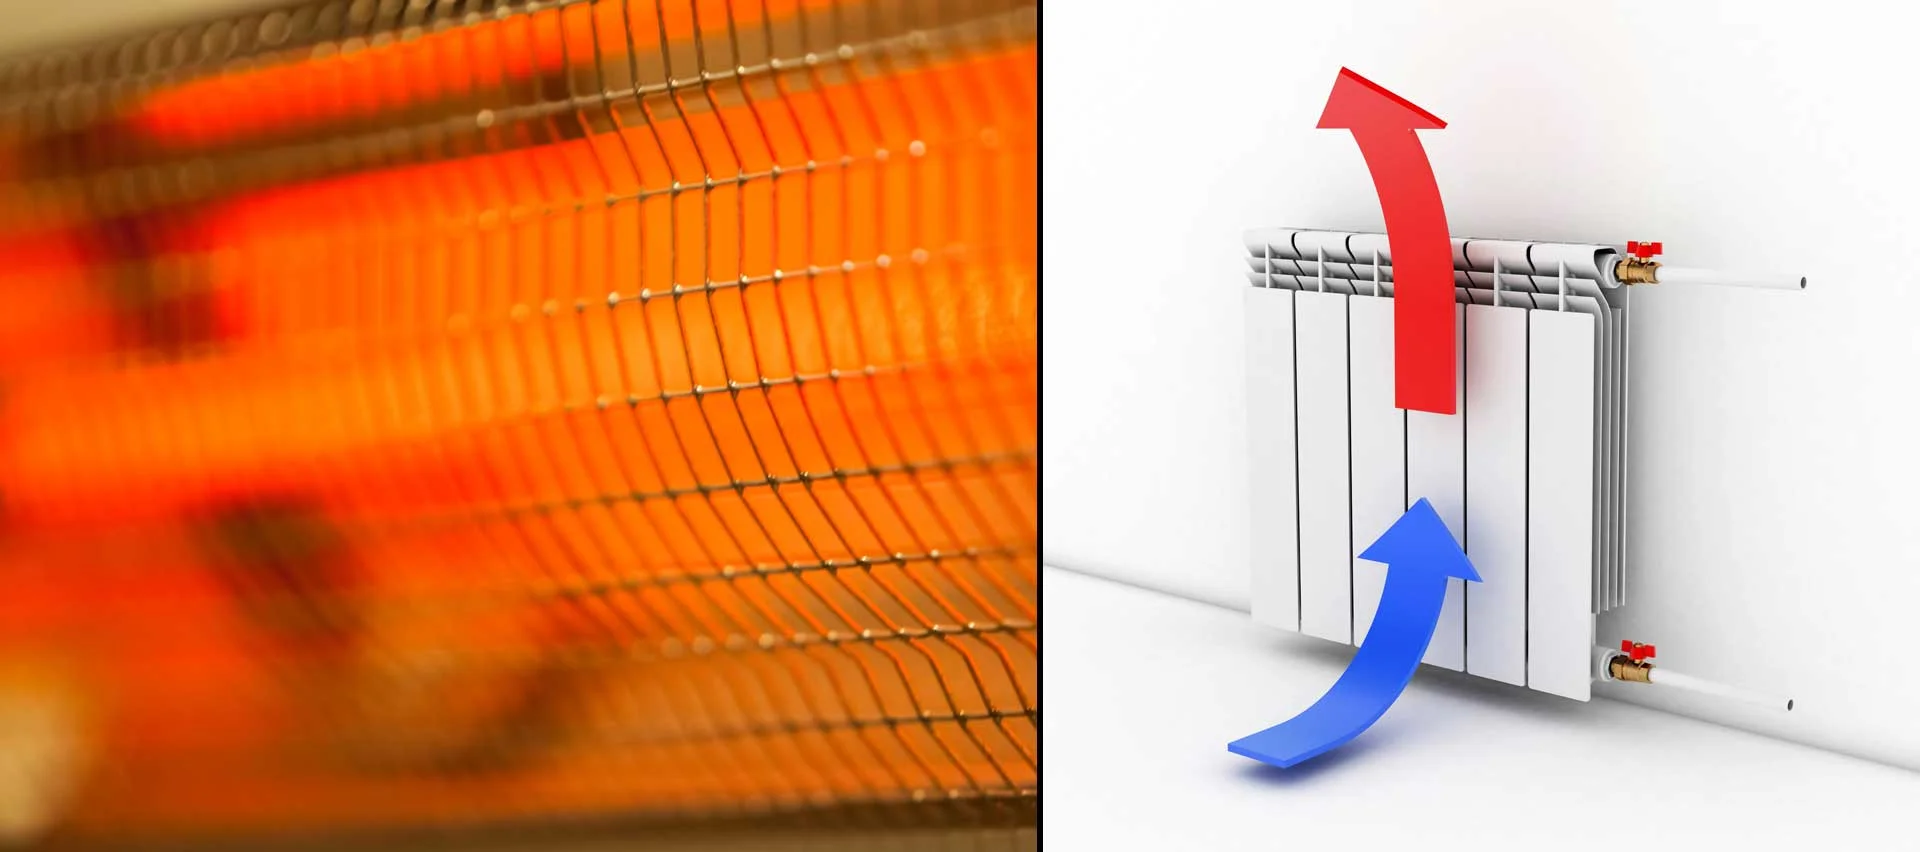 Electric Infrared Heater Vs. Conventional Heaters